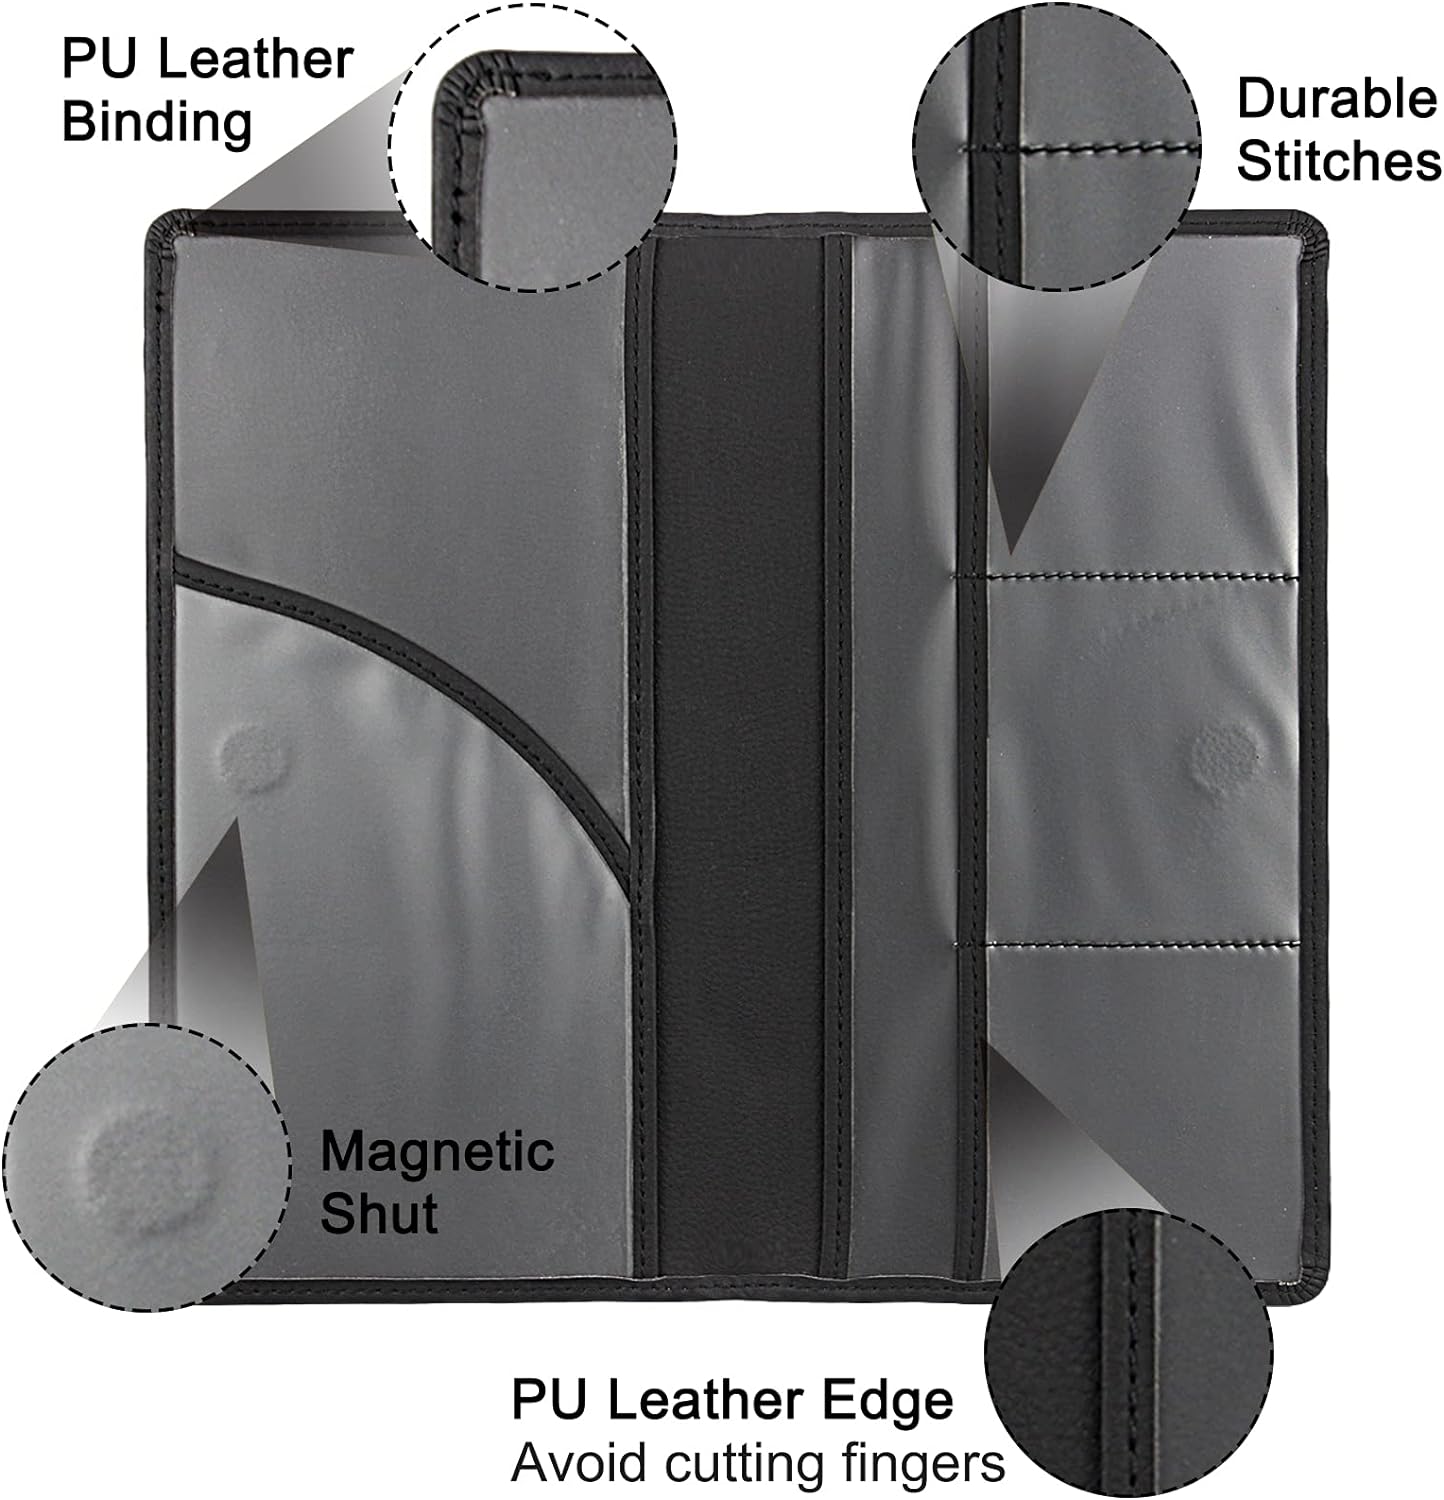 Premium Leather Car Registration & Insurance Card Holder with Magnetic Shut - For Documents, Cards, License